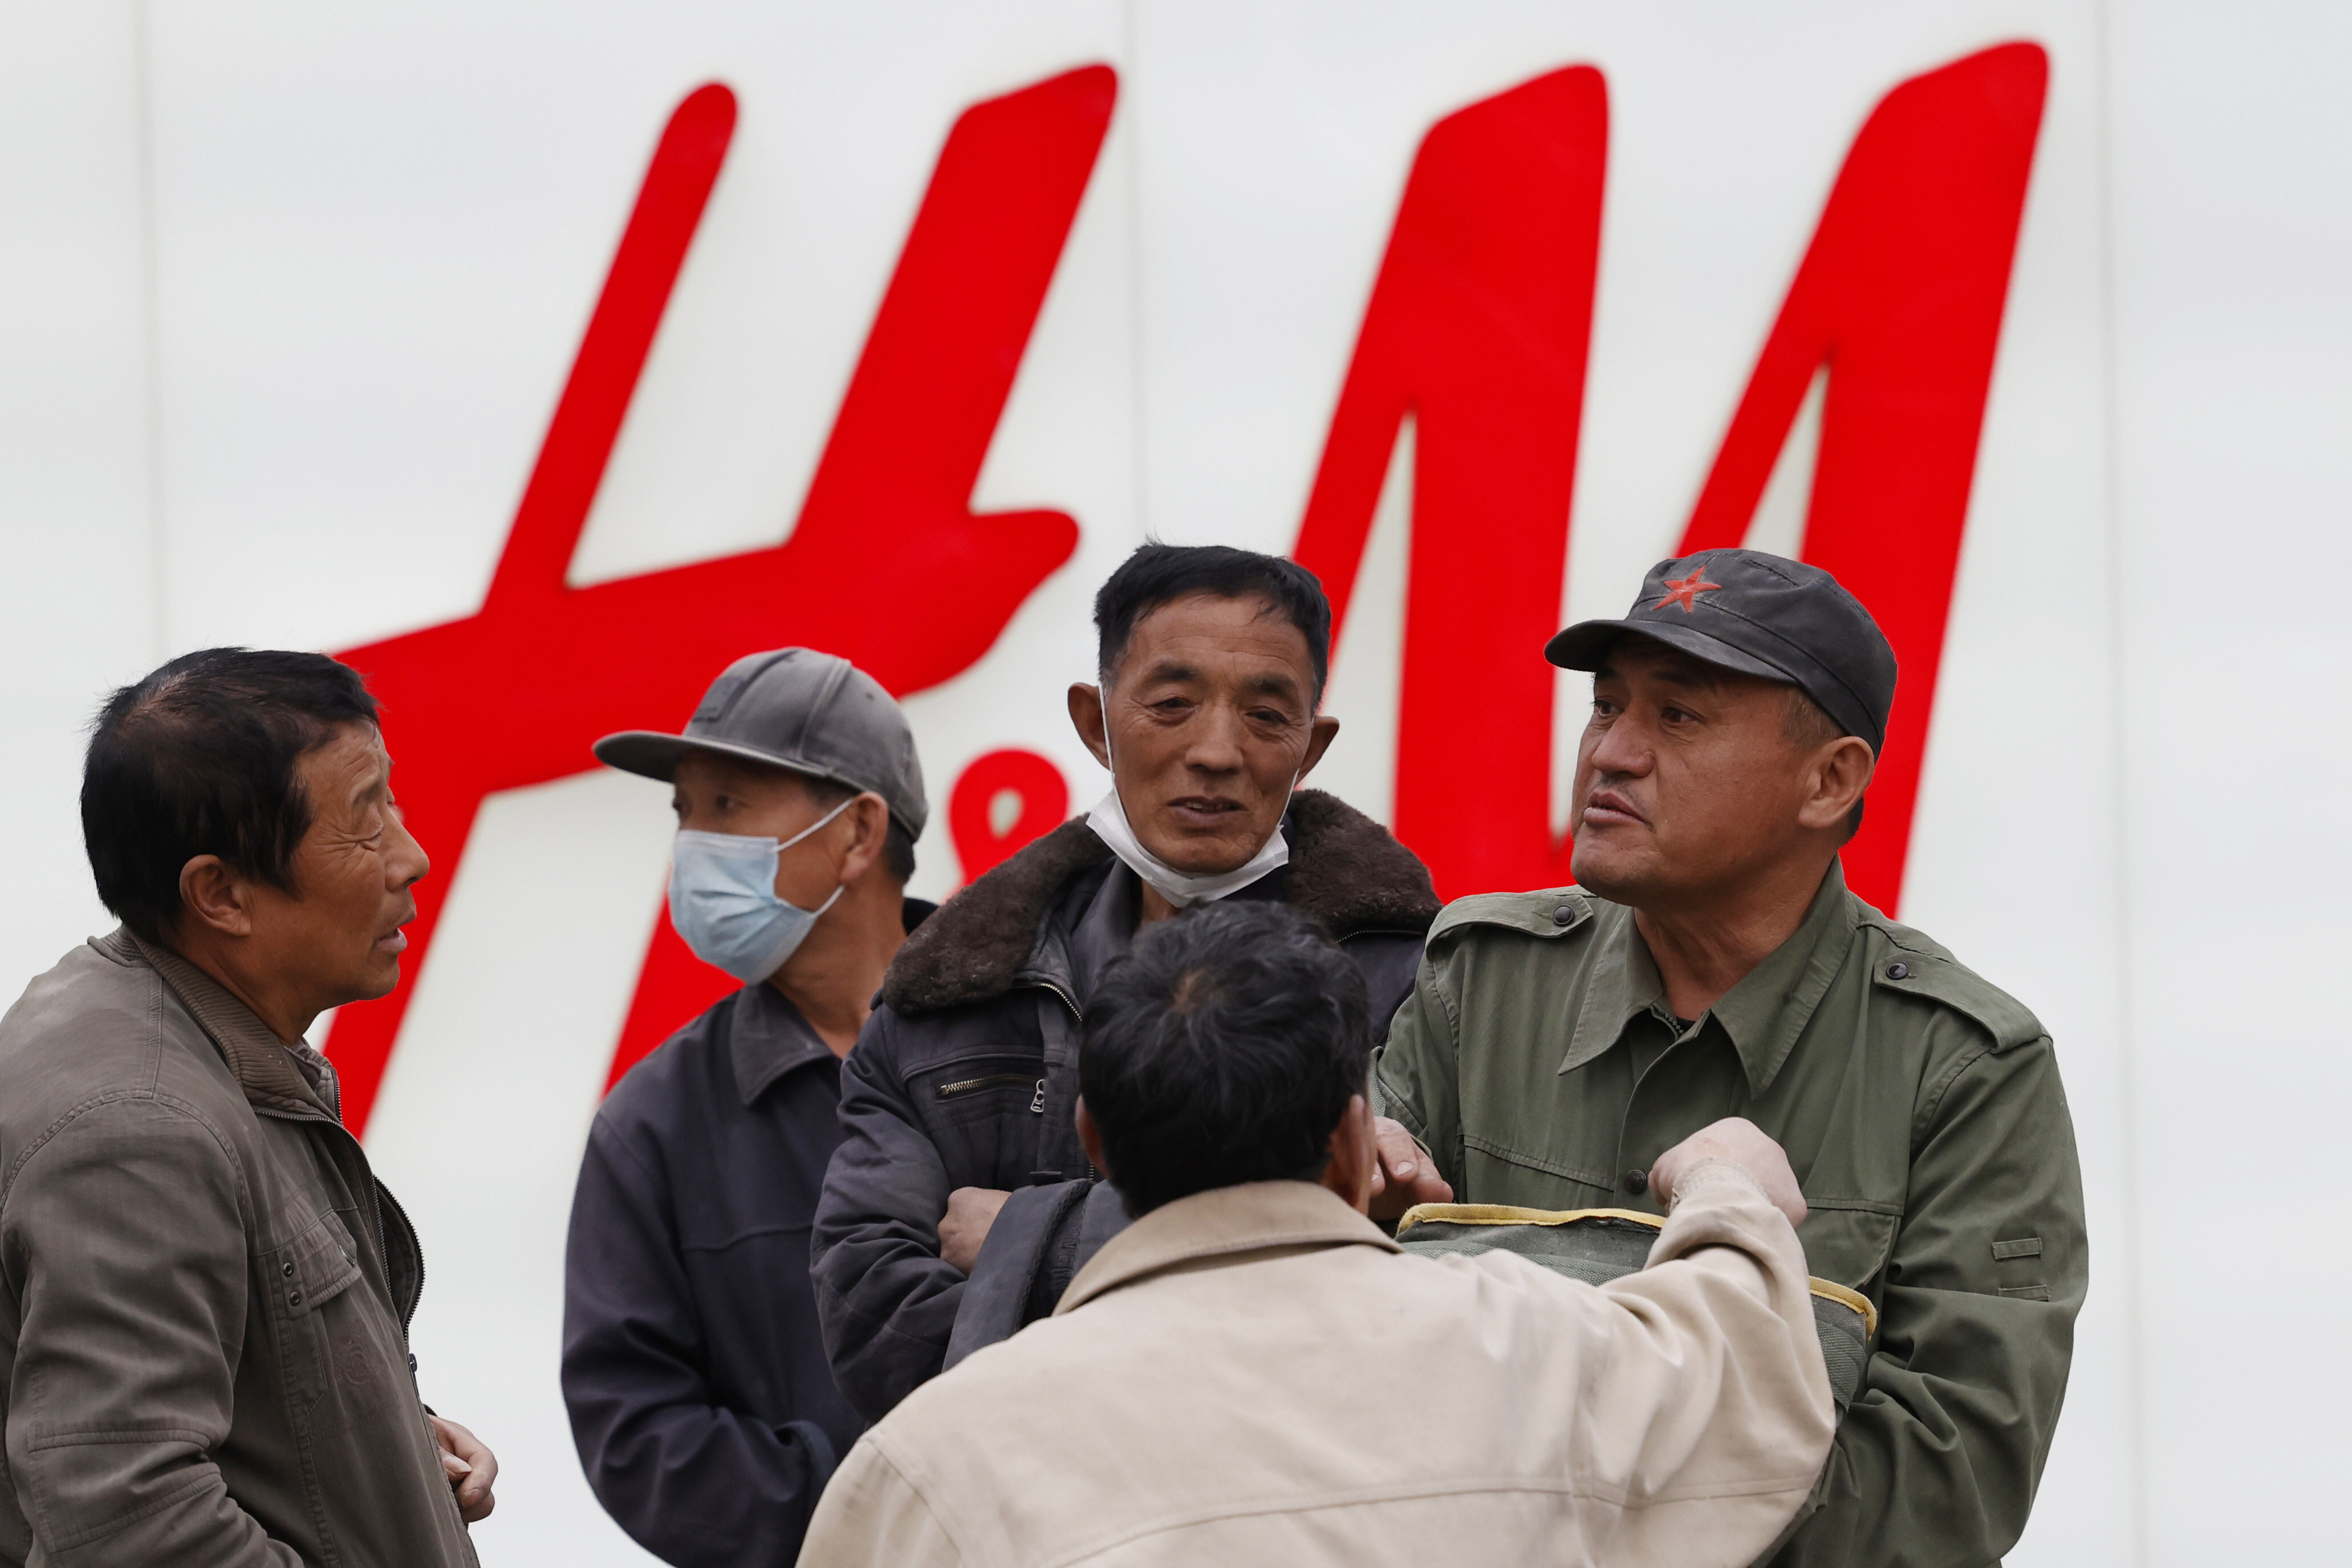 Men gather near an H&M store in Beijing on March 29. Photo: Associated Press